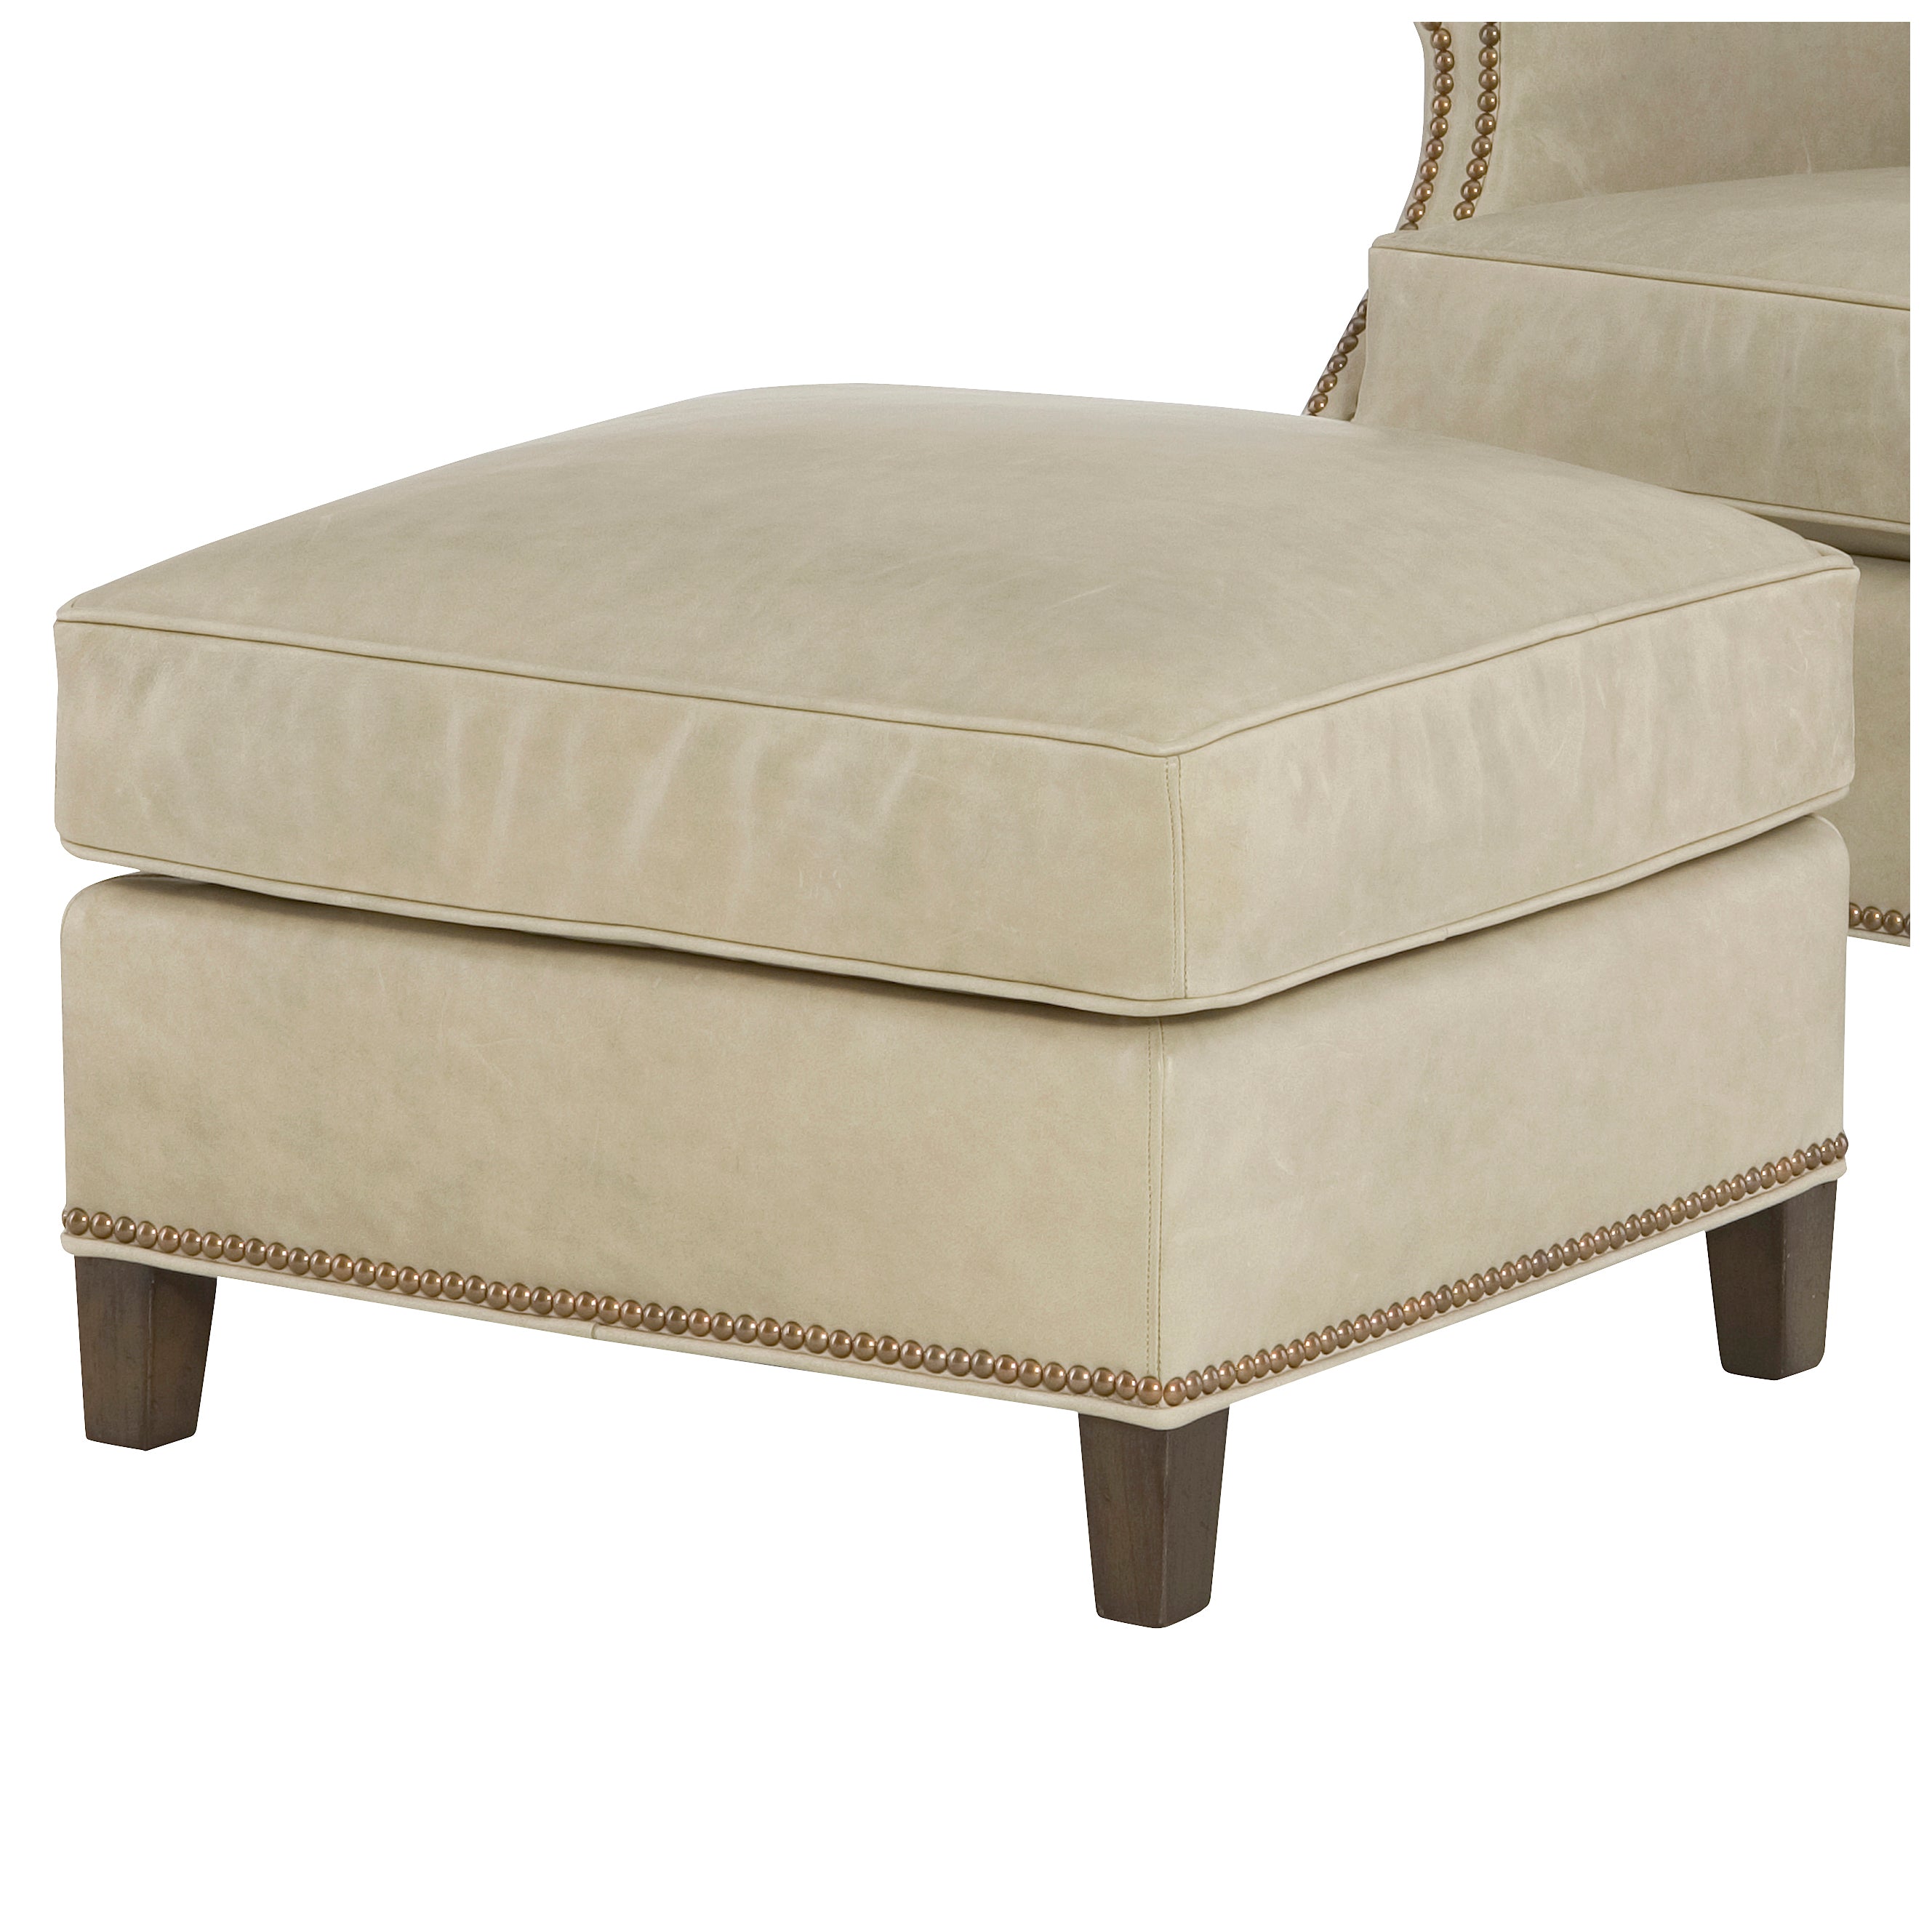 Wilborn Leather Ottoman by Wesley Hall shown in Mont Blanc Mist leather